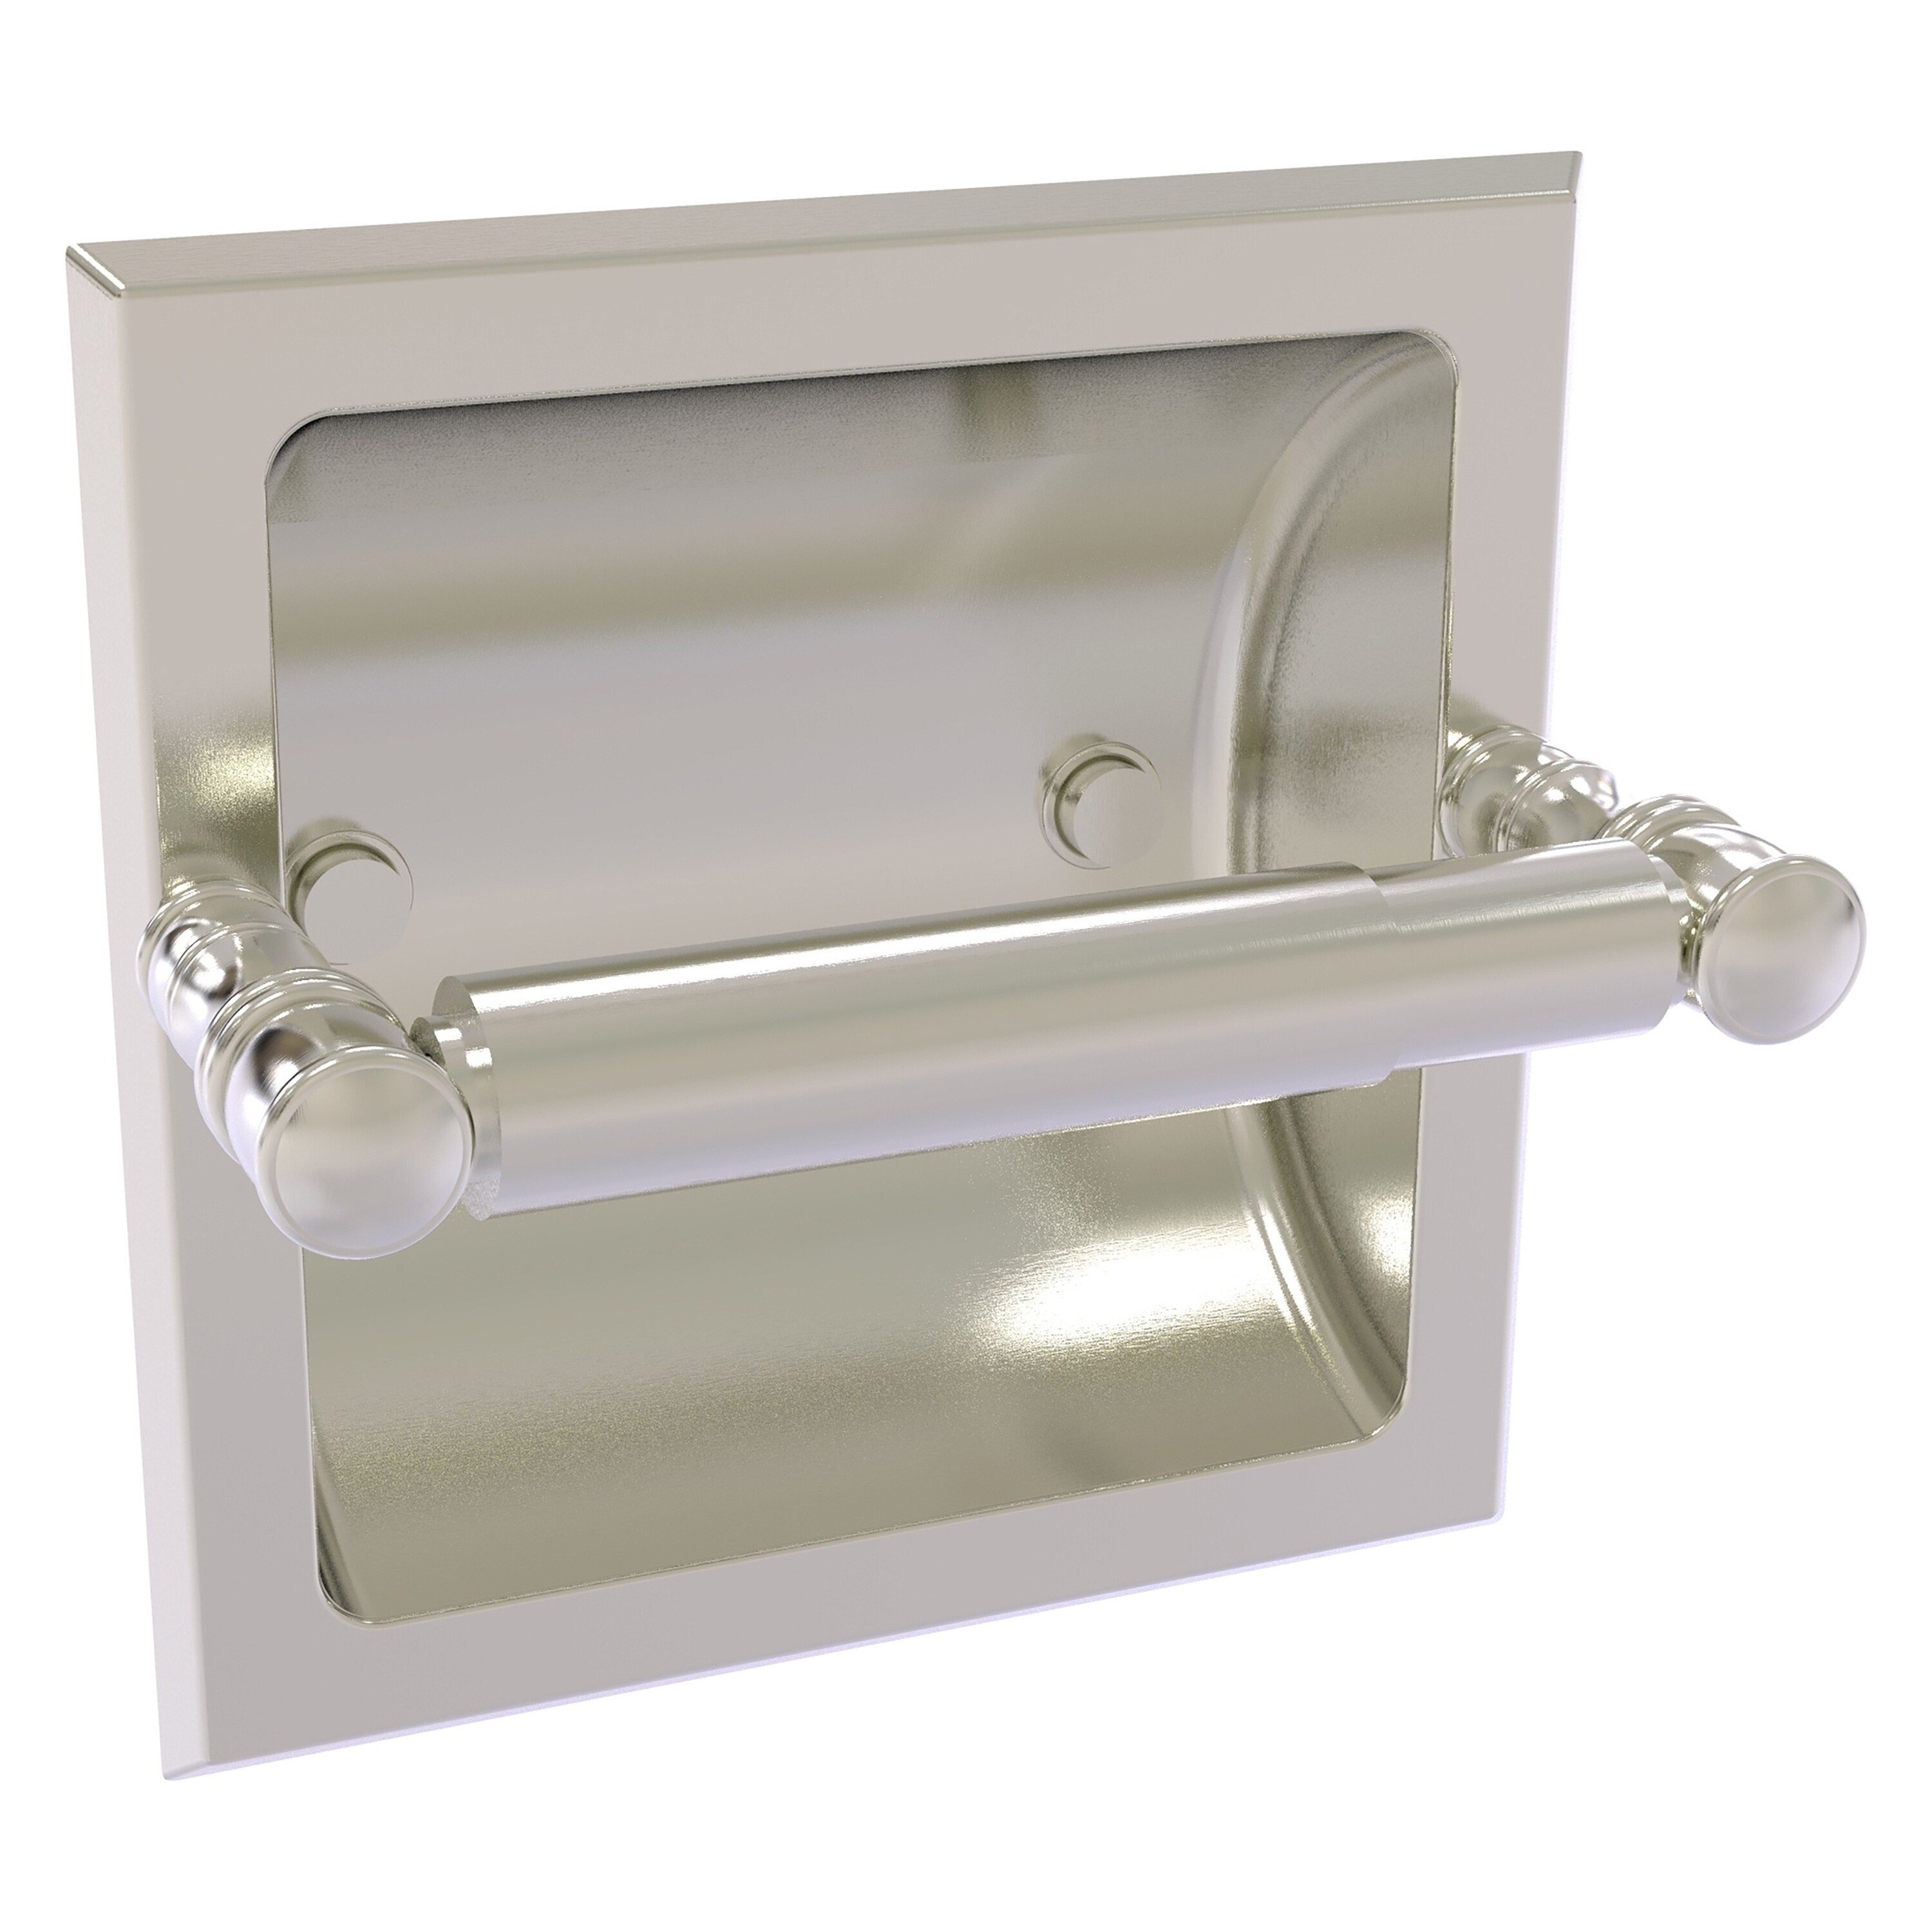 YHDSN Recessed Toilet Paper Holder Brushed Nickel, Contemporary